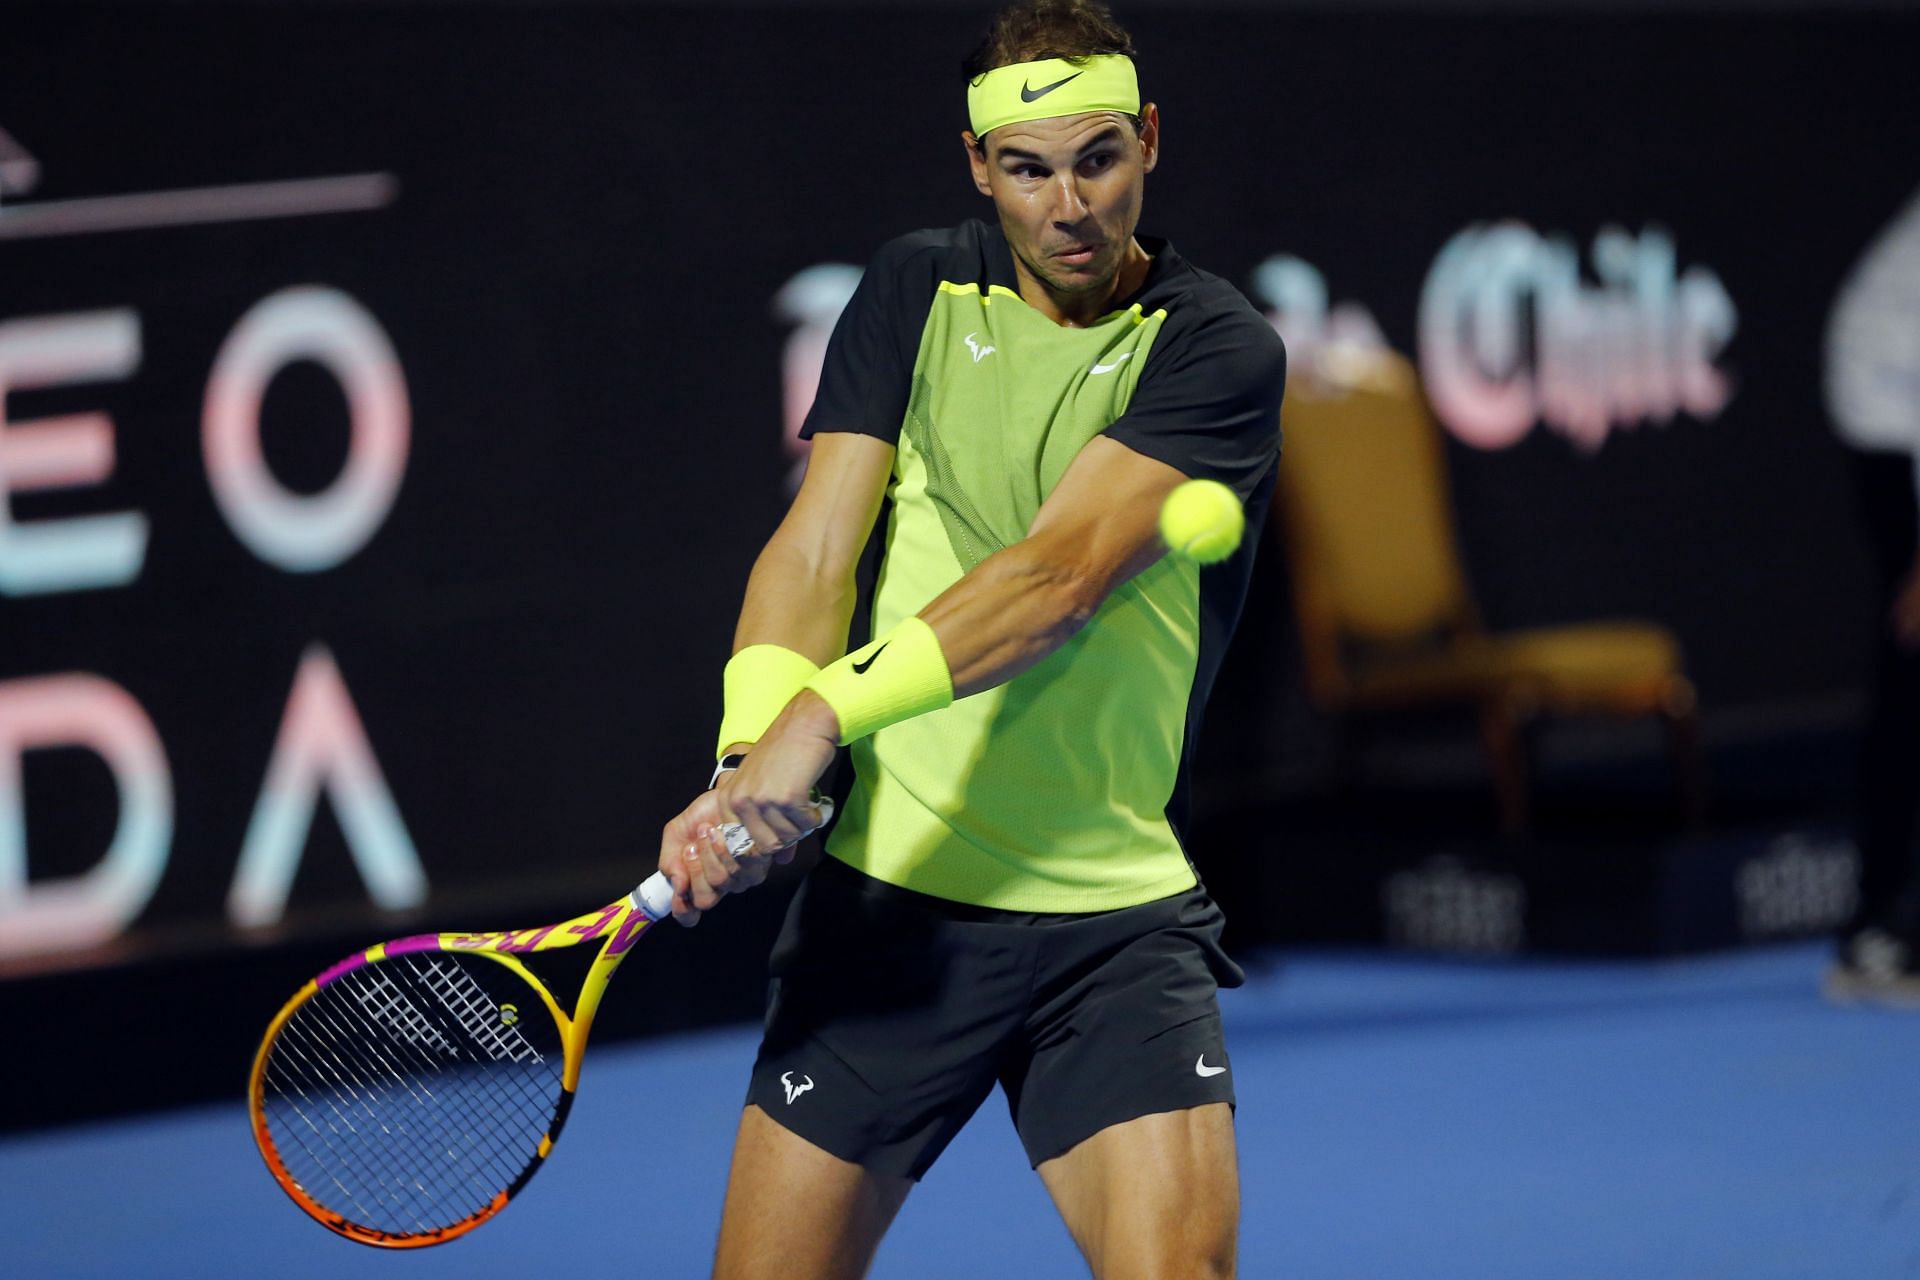 Rafael Nadal is currently on a tour of Latin America for various exhibition matches.